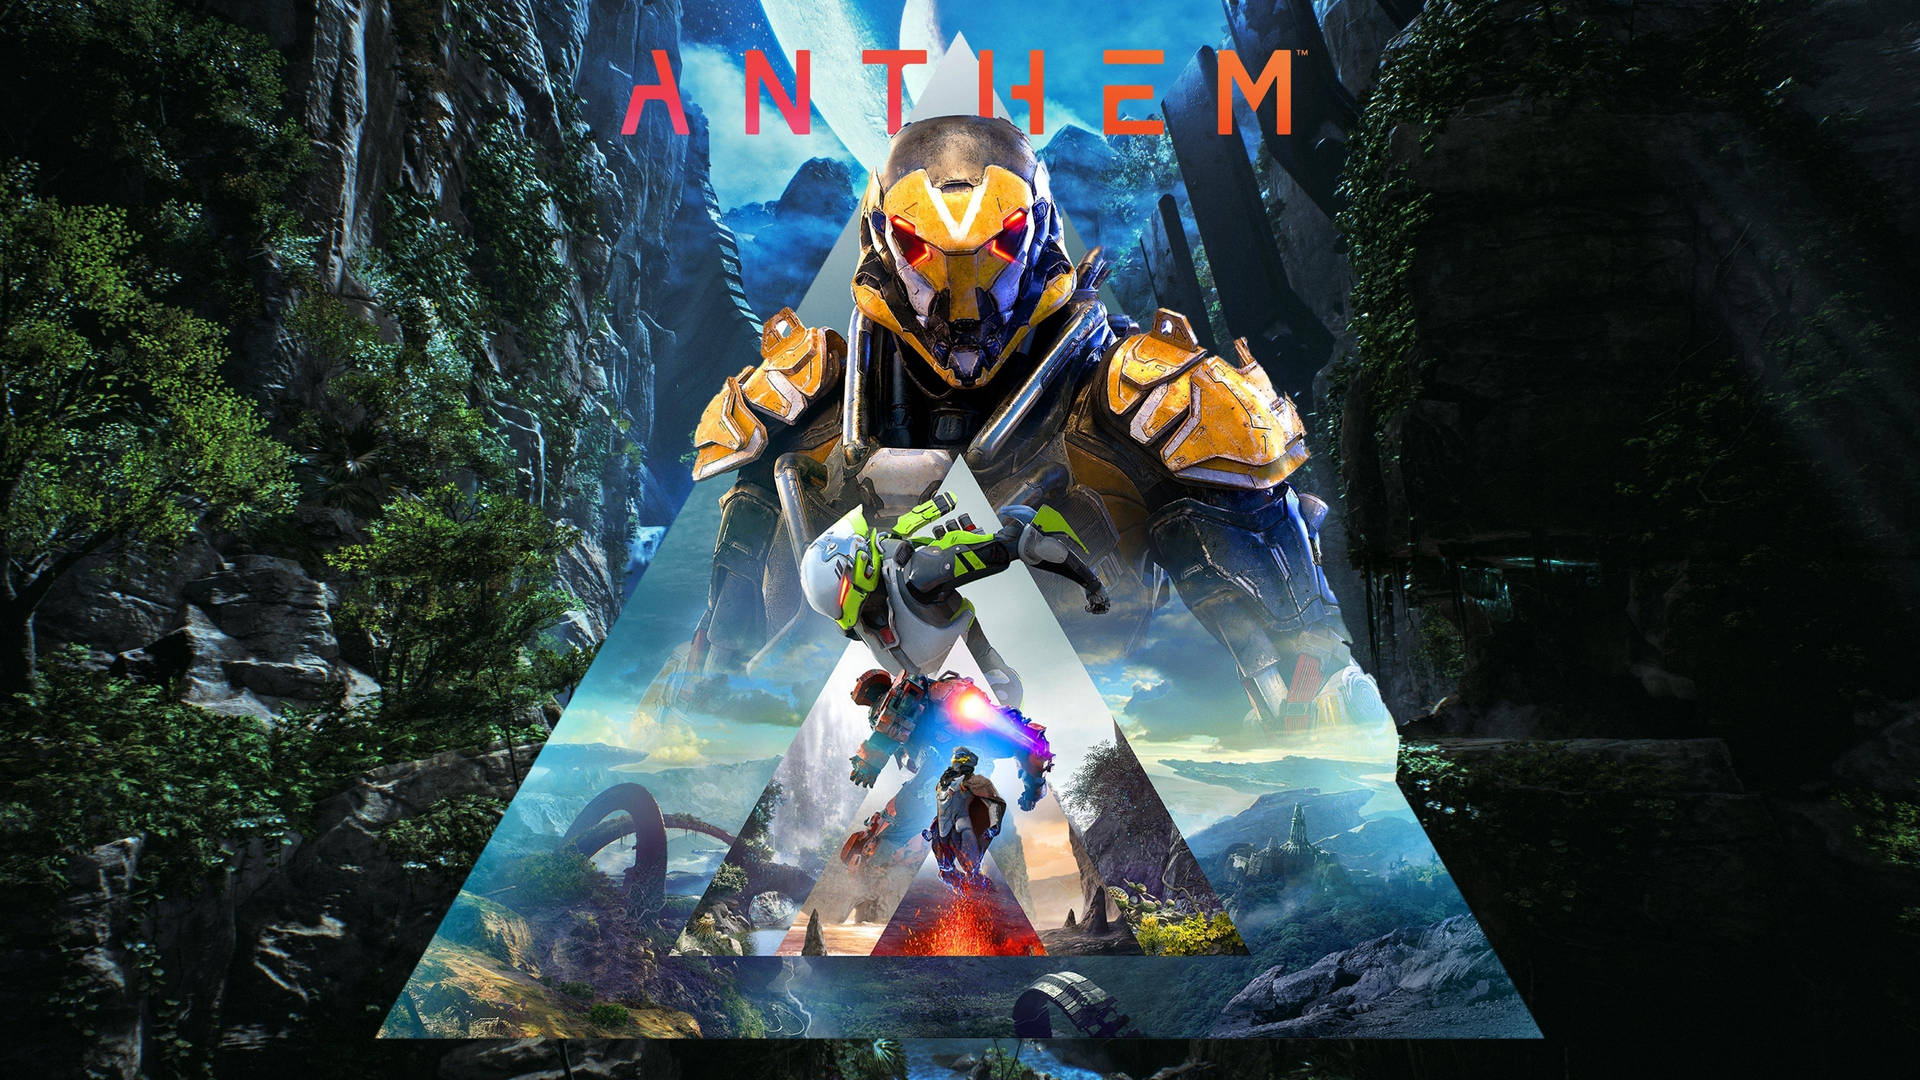 Enjoy this dynamic and captivating artwork from the popular video game “Anthem" Wallpaper